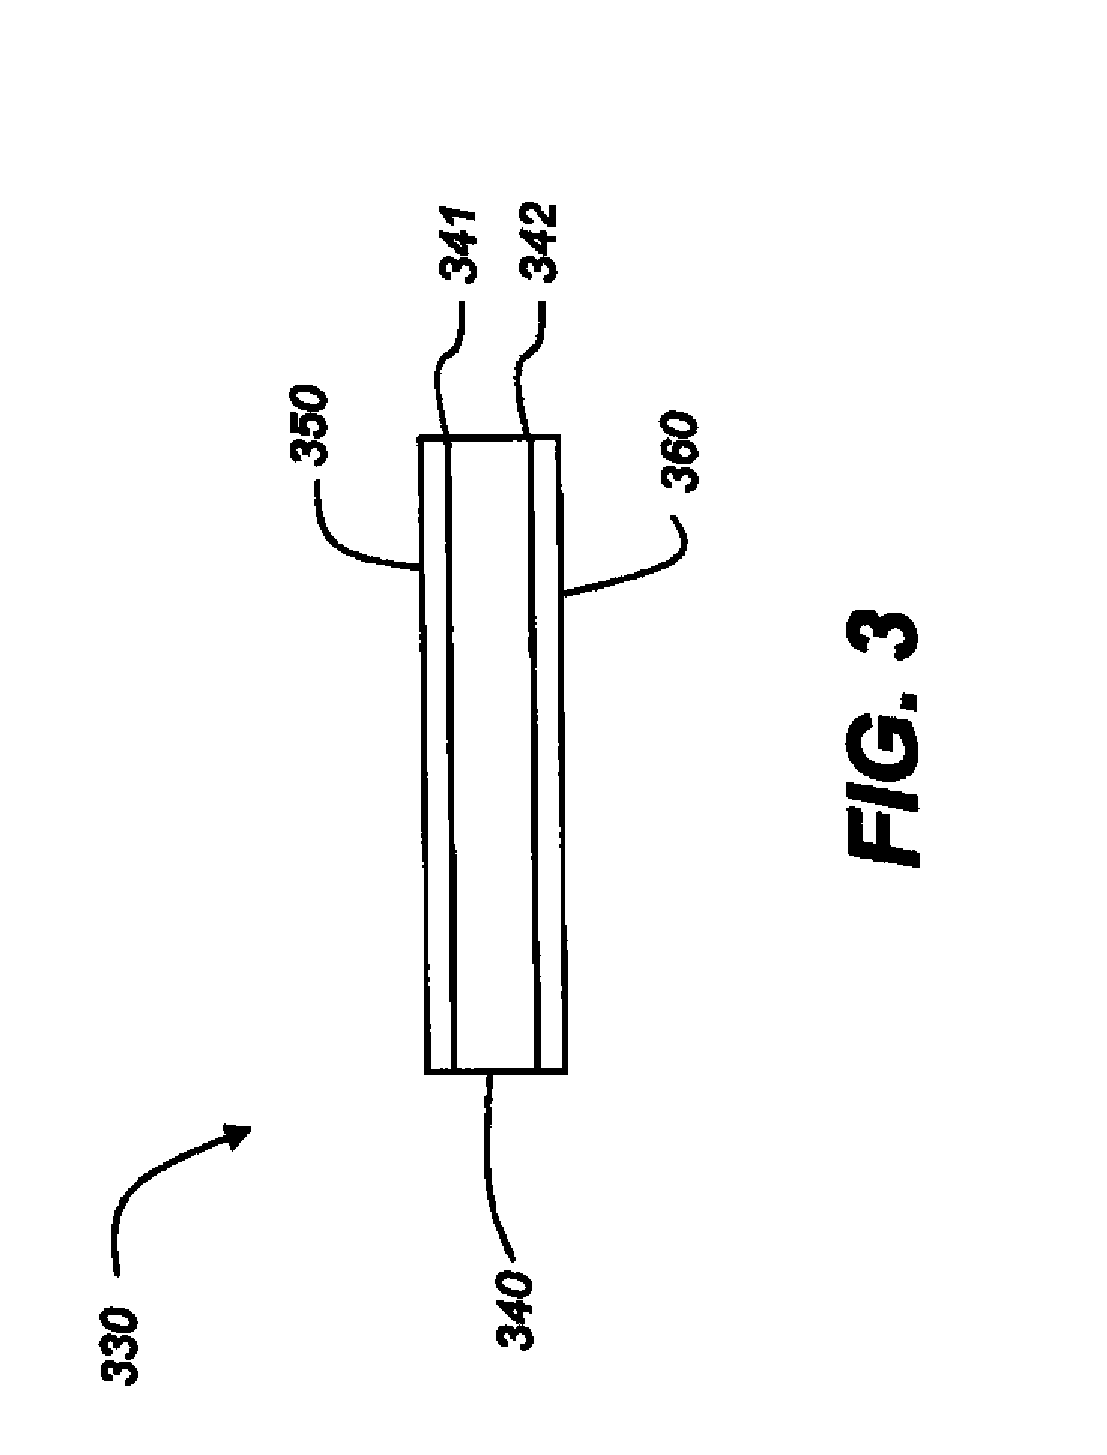 Photopolymerizable compositions for electroless plating methods